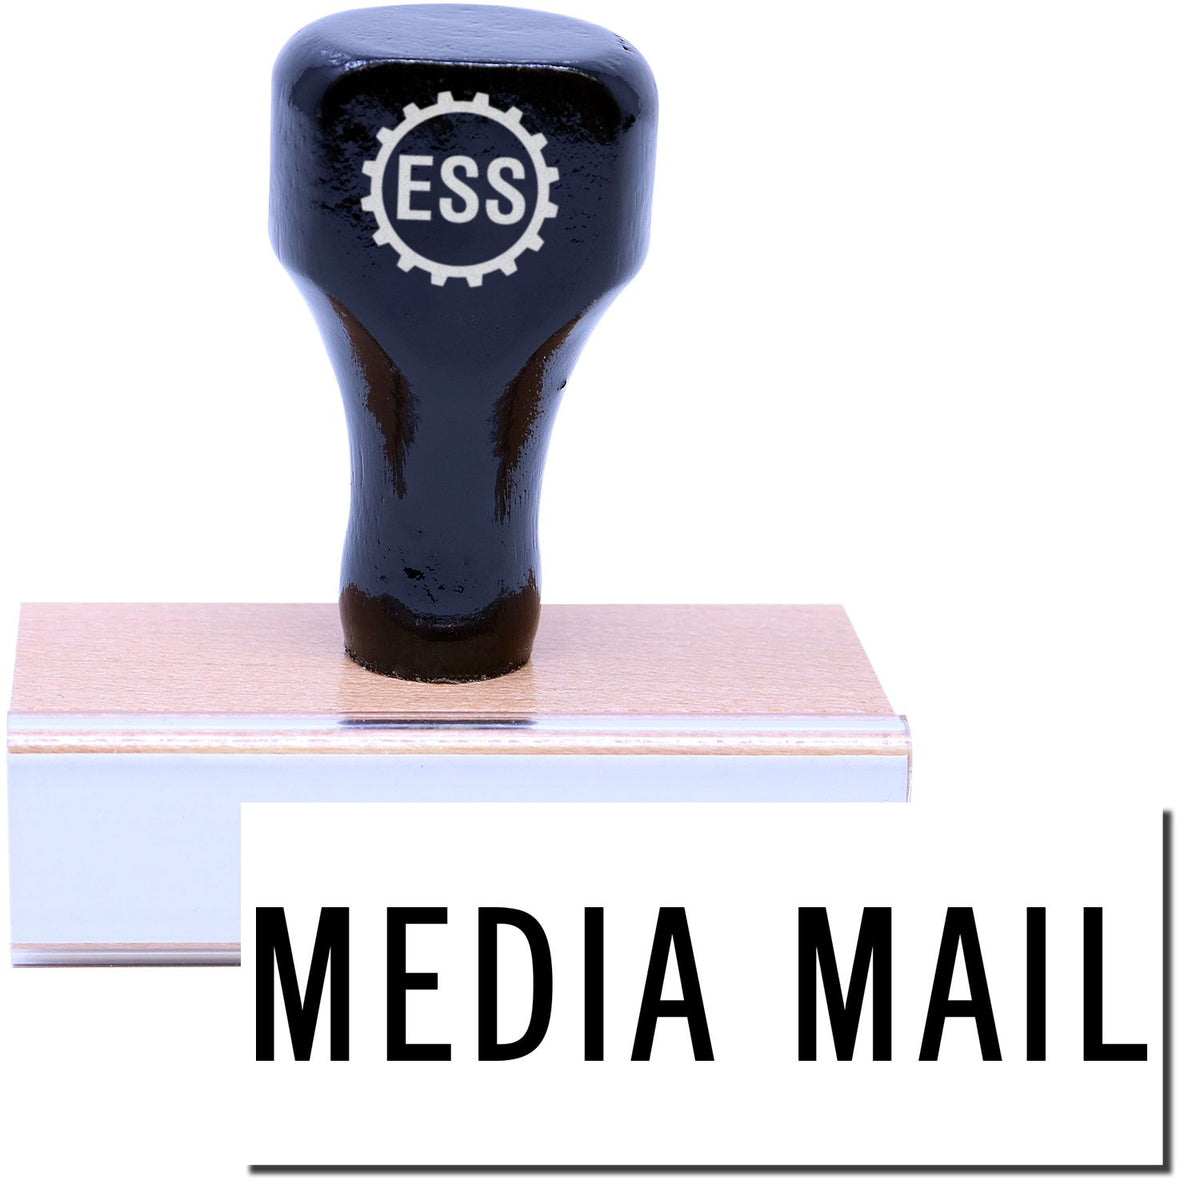 A stock office rubber stamp with a stamped image showing how the text &quot;MEDIA MAIL&quot; in a large font is displayed after stamping.